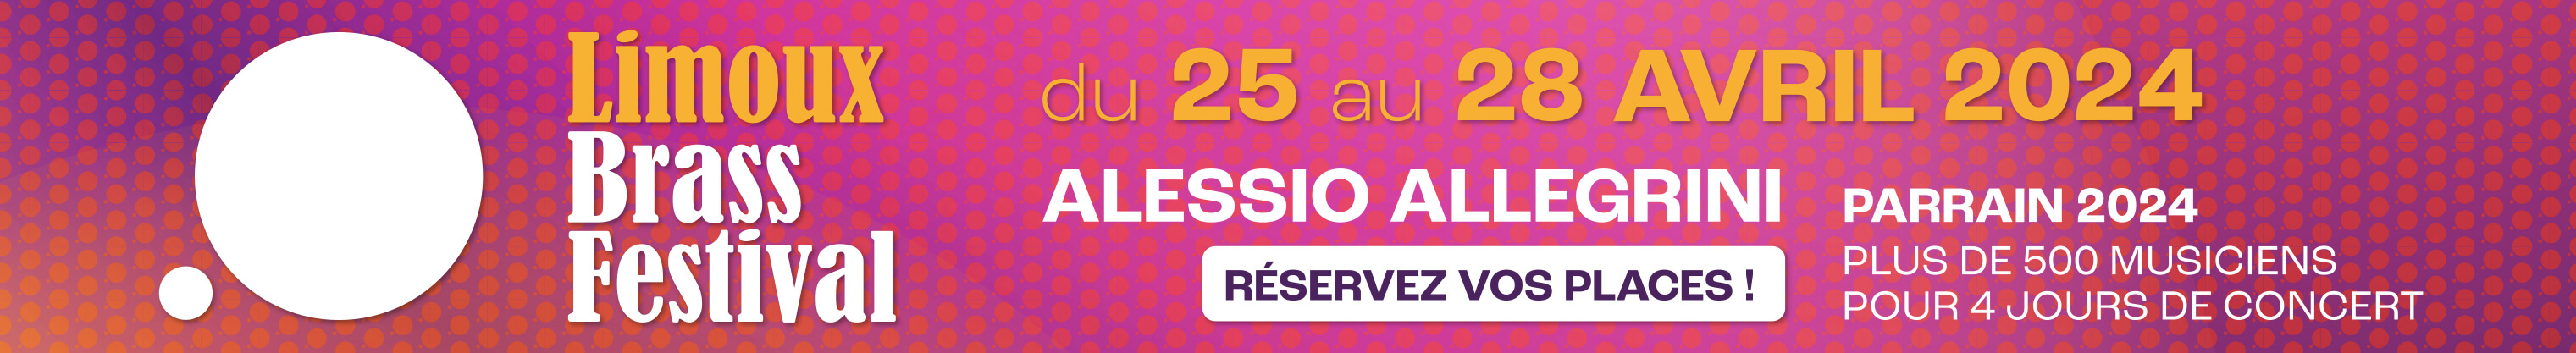 Limoux Brass Festival - Edition 2024